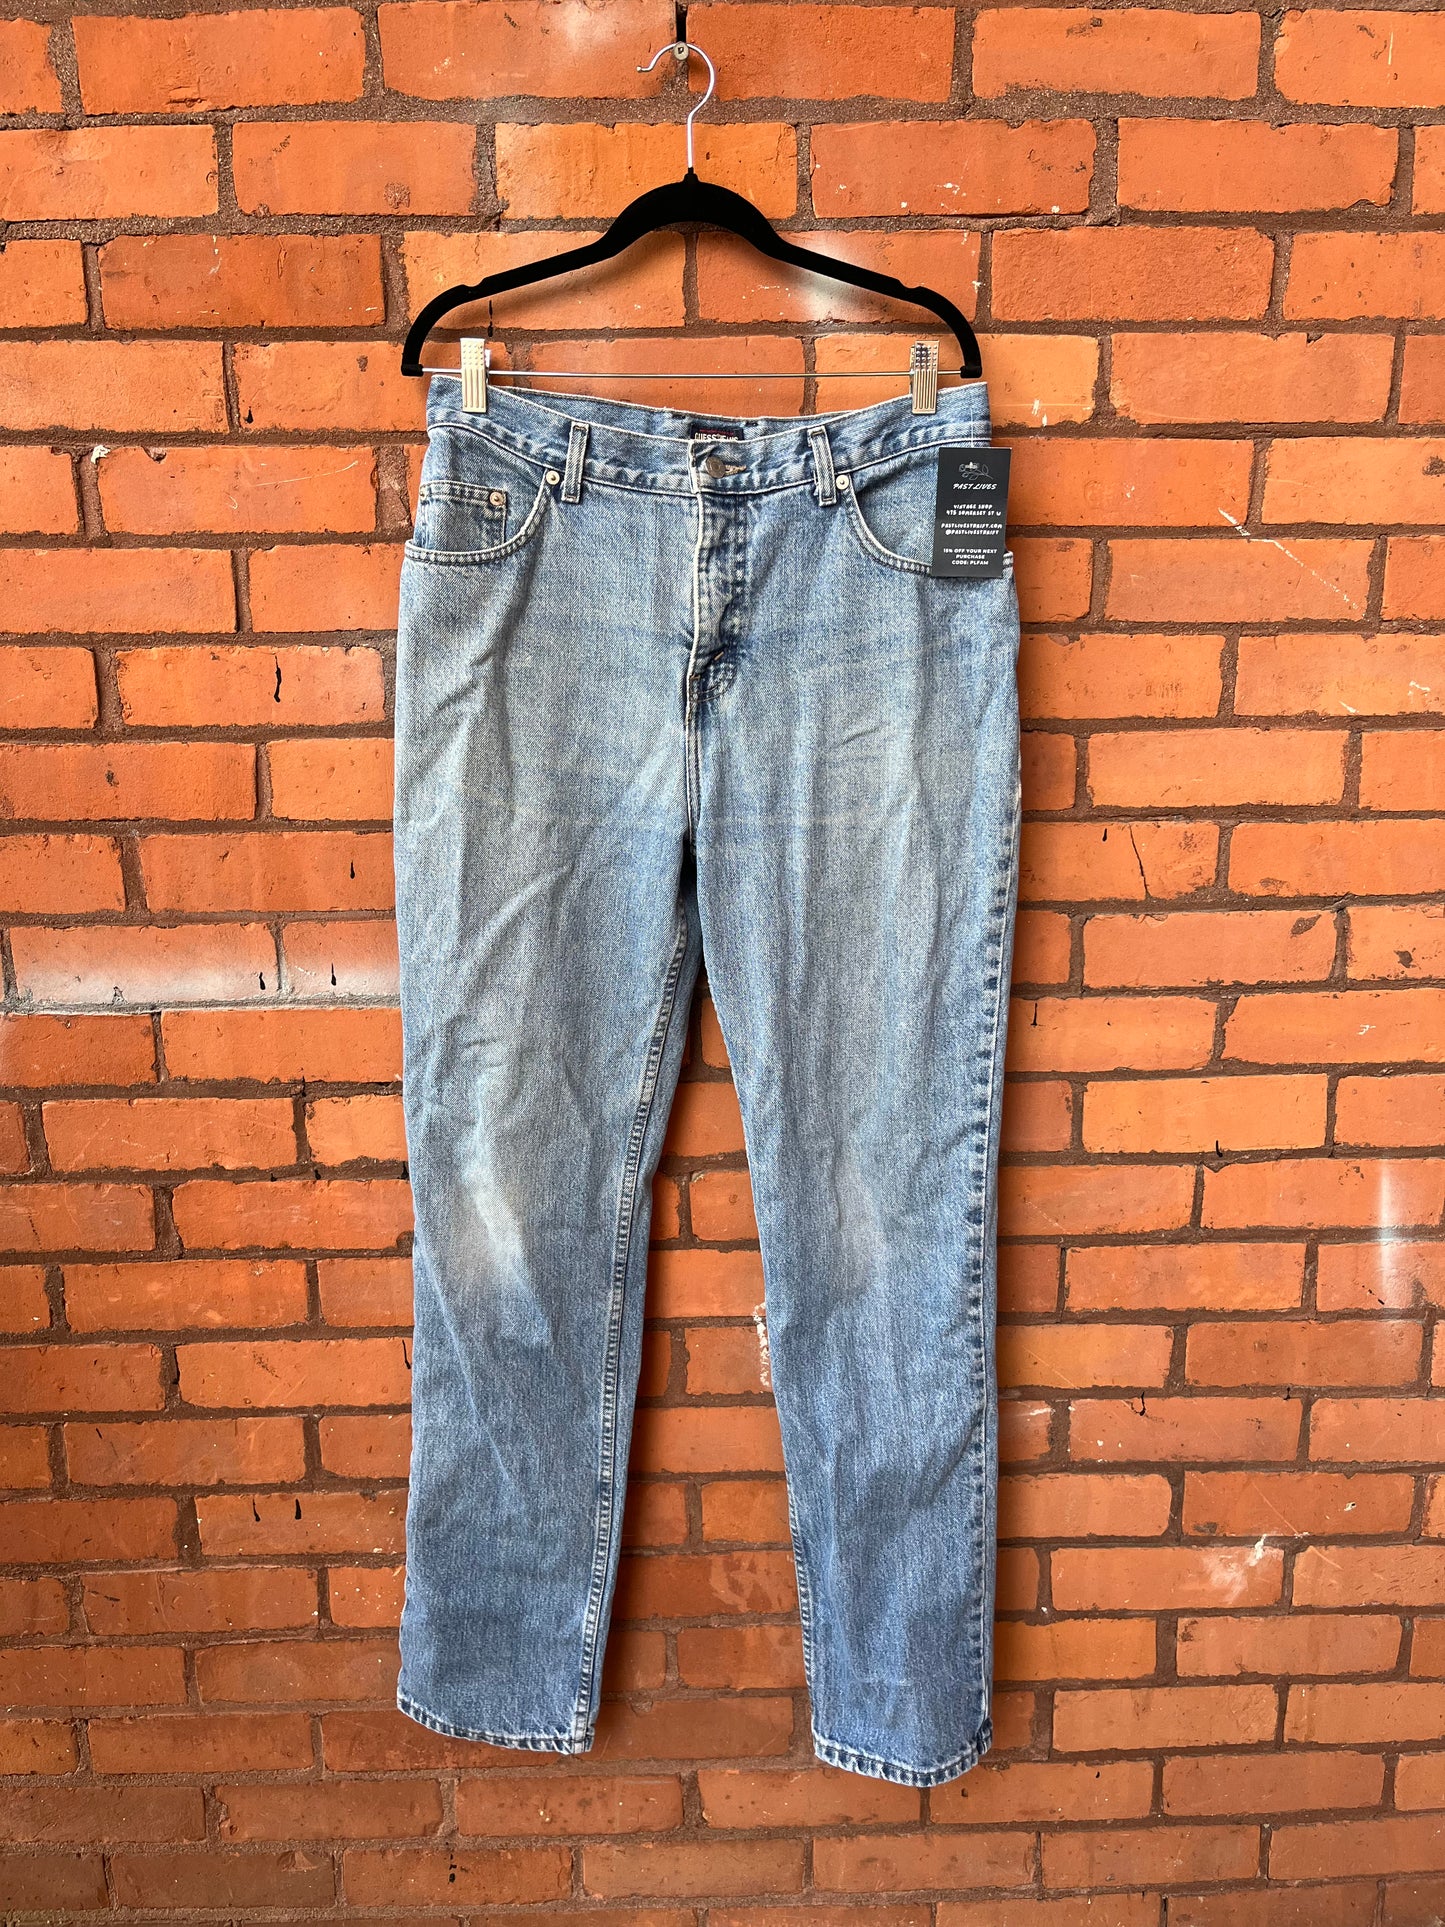 90’s Vintage Guess High Waist Faded Jeans / 32 Waist